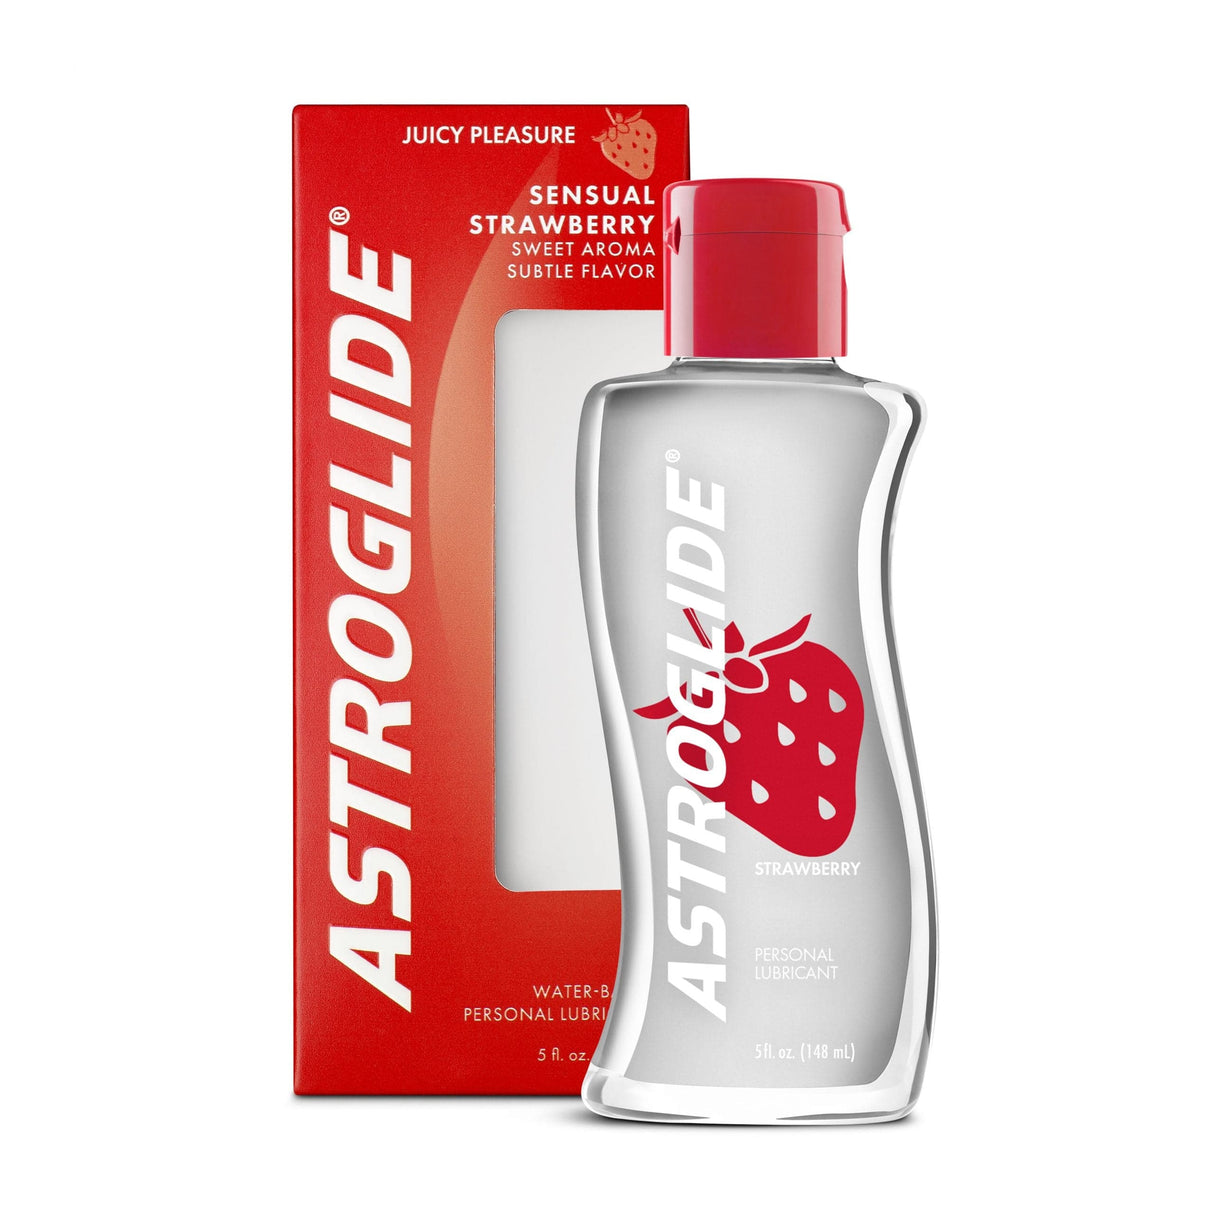 Astroglide - Sensual Strawberry Flavoured Water Based Personal Lubricant AG1013 CherryAffairs